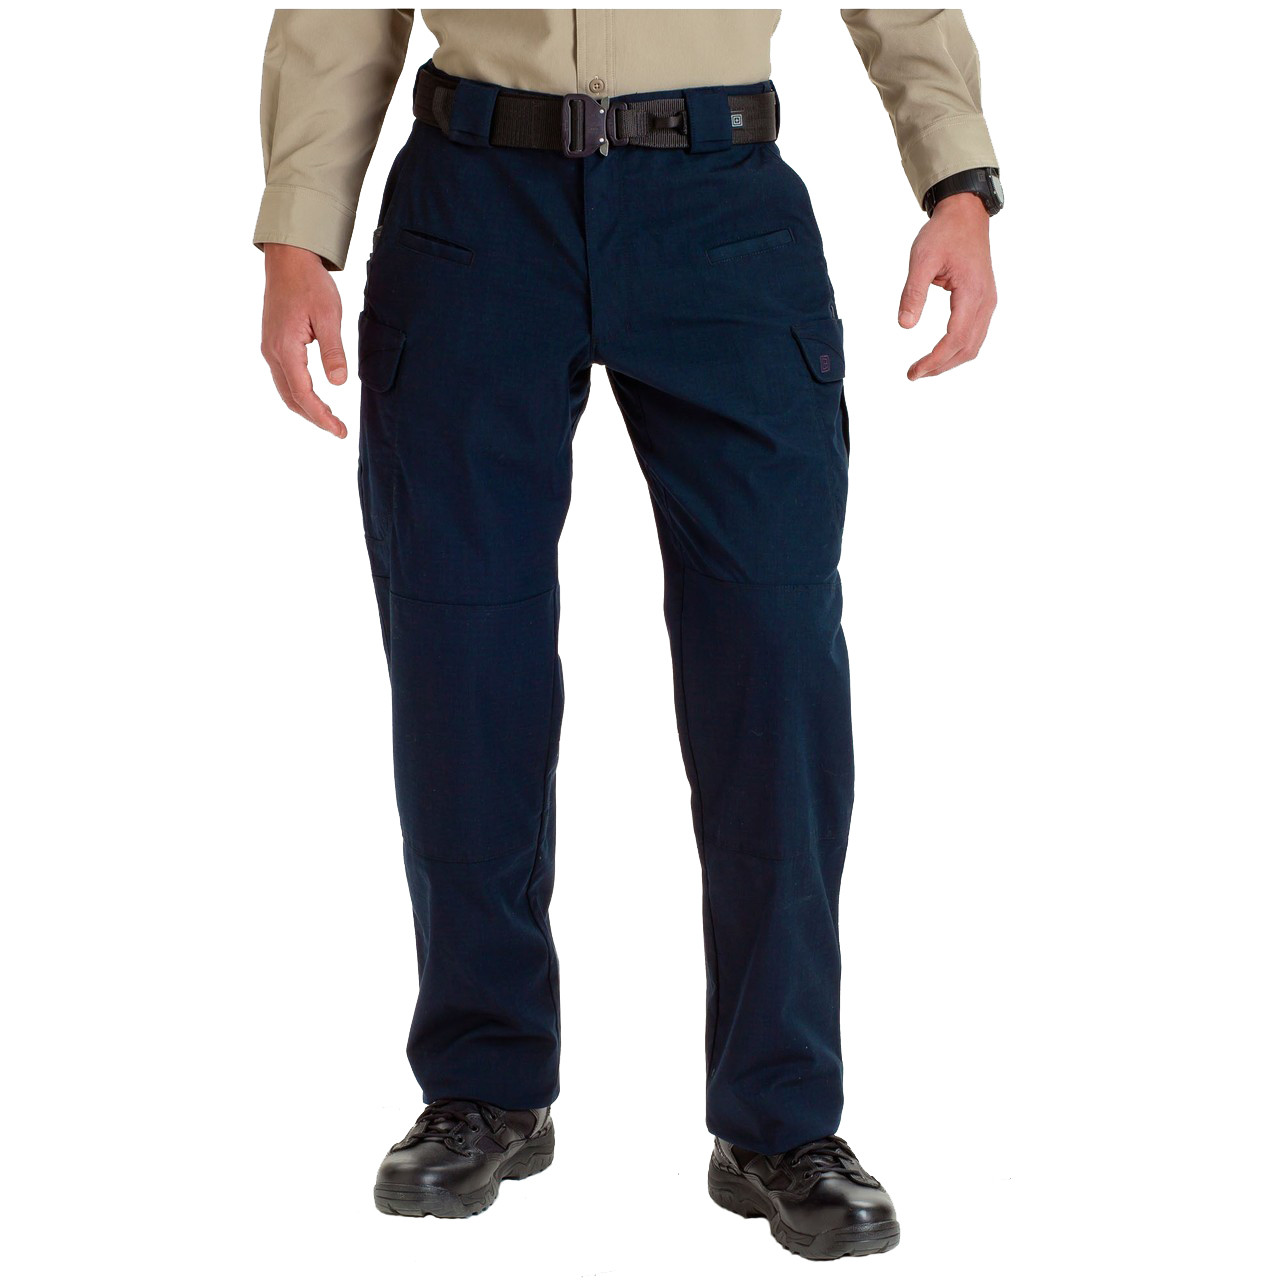 5.11 Tactical Stryke Pant with Flex-Tac Battle - Tactical Asia